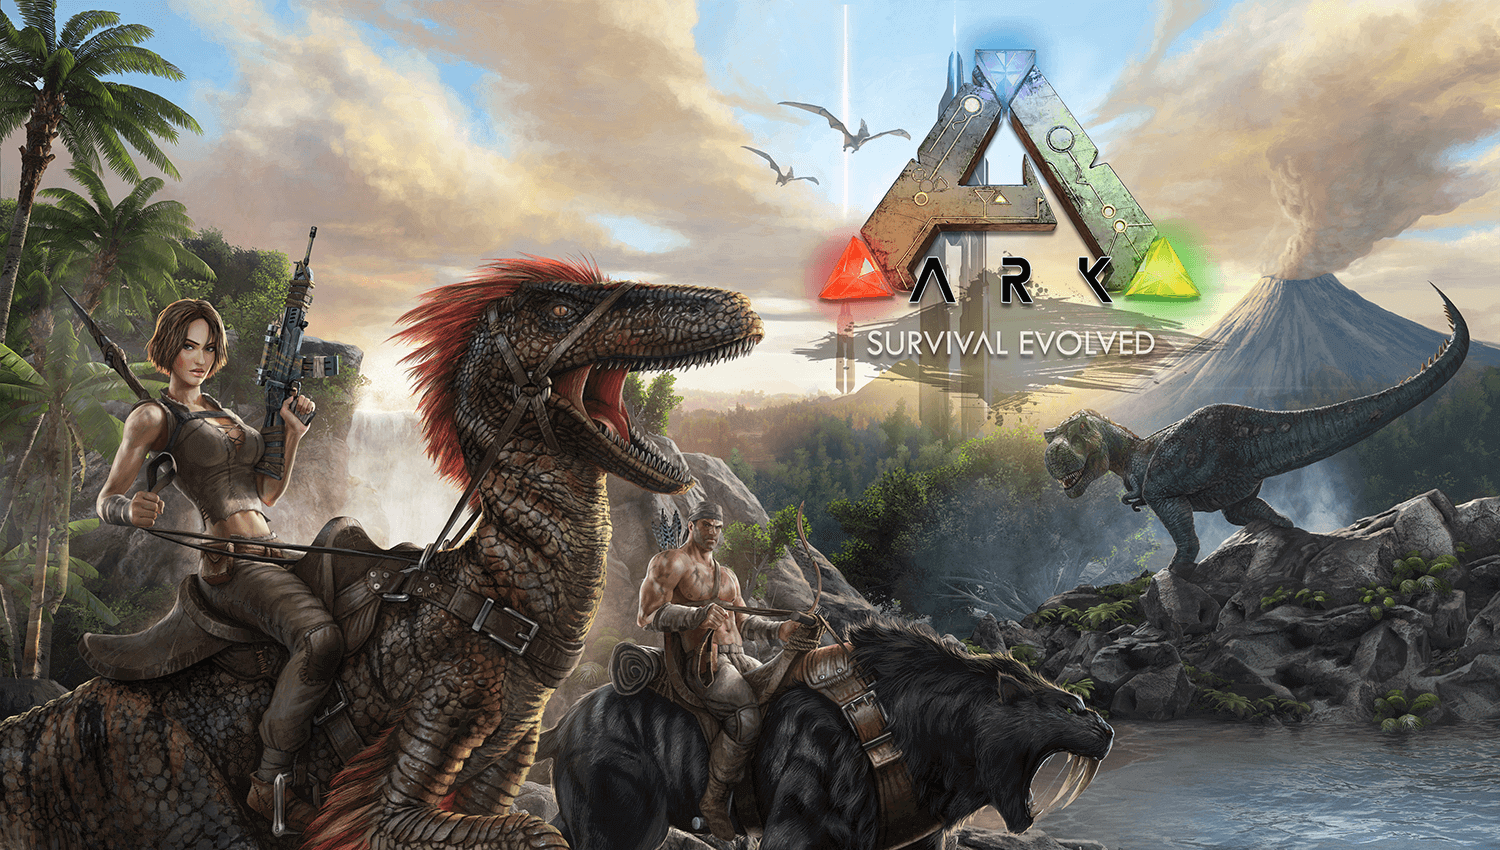 Ark: Survival Evolved (2017) Game Icons and Banners: A Comprehensive Guide